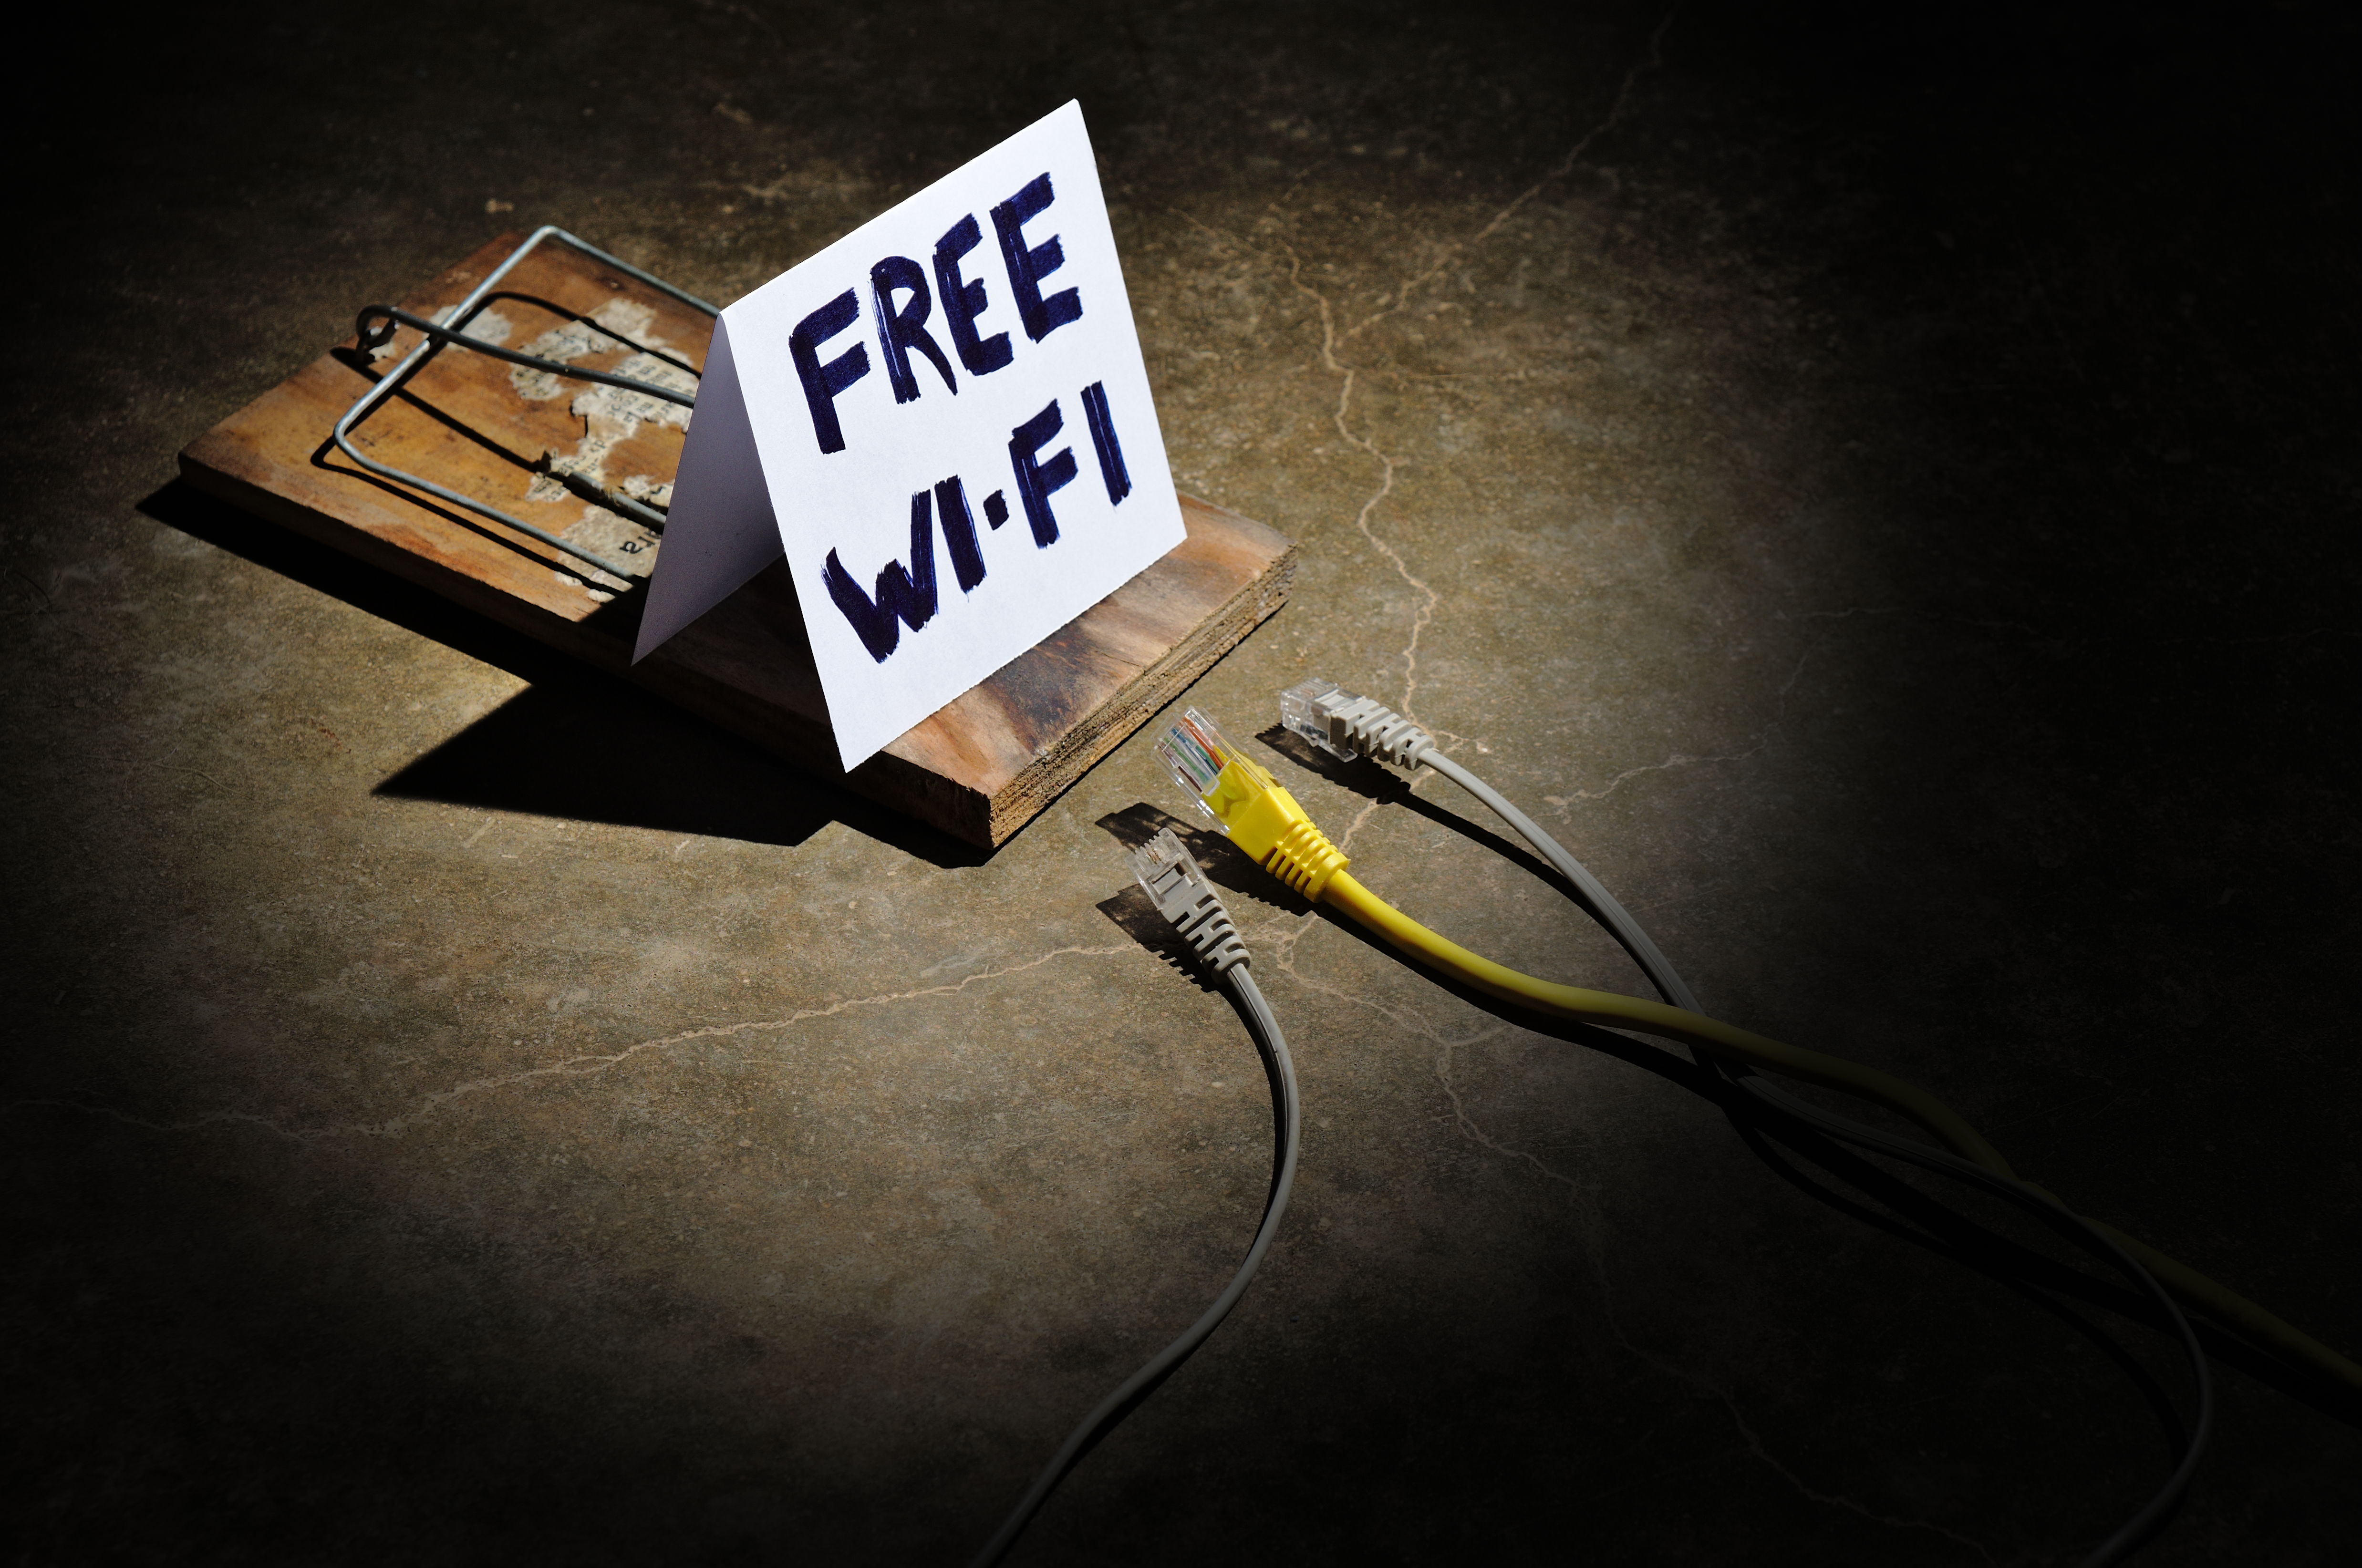 Cyber Security Best Practices When Using Public WiFi Networks